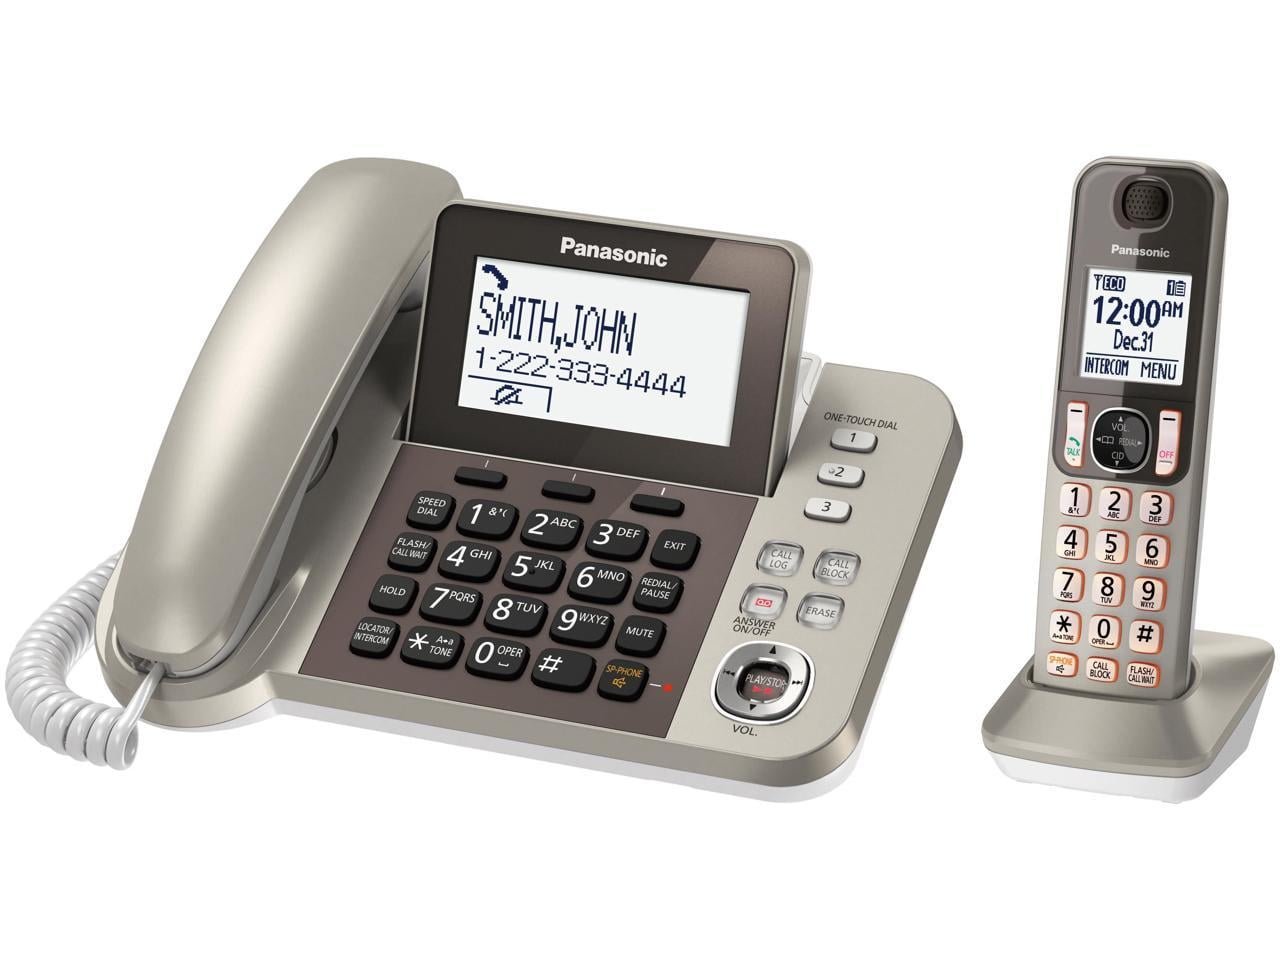 Review of Panasonic Cordless Phones: Everything I Discovered